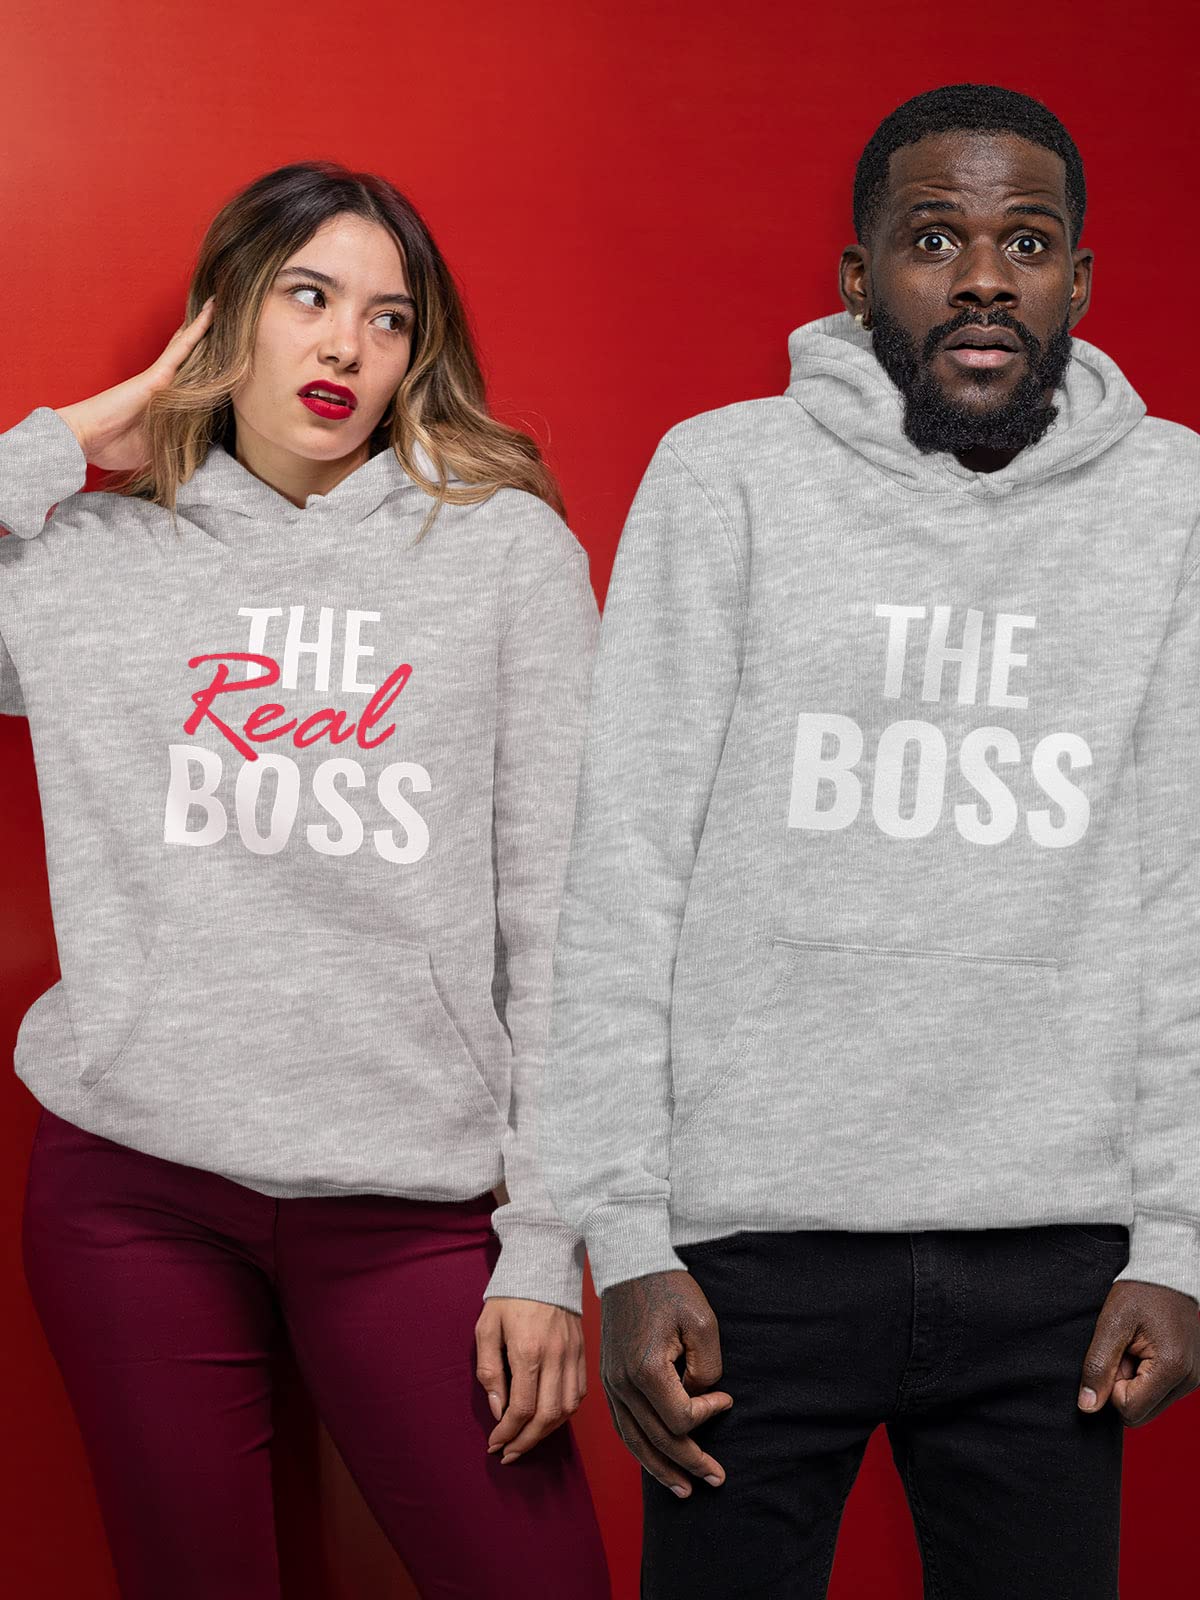 The Boss & The Real Boss Matching Hoodies for Couples His and Hers Hoodie Set